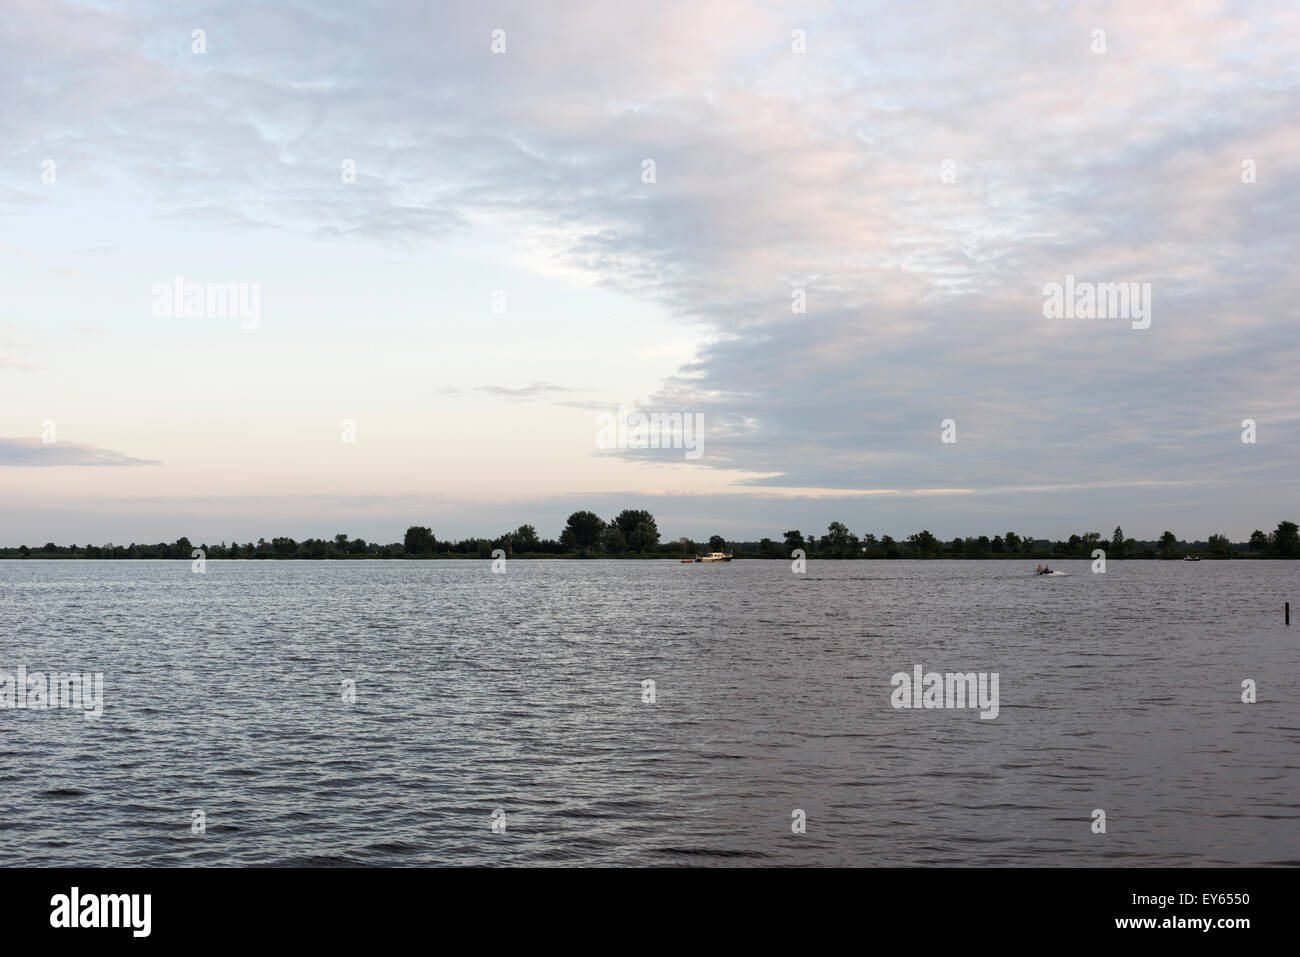 Page 2 - Giethoorn High Resolution Stock Photography and Images - Alamy